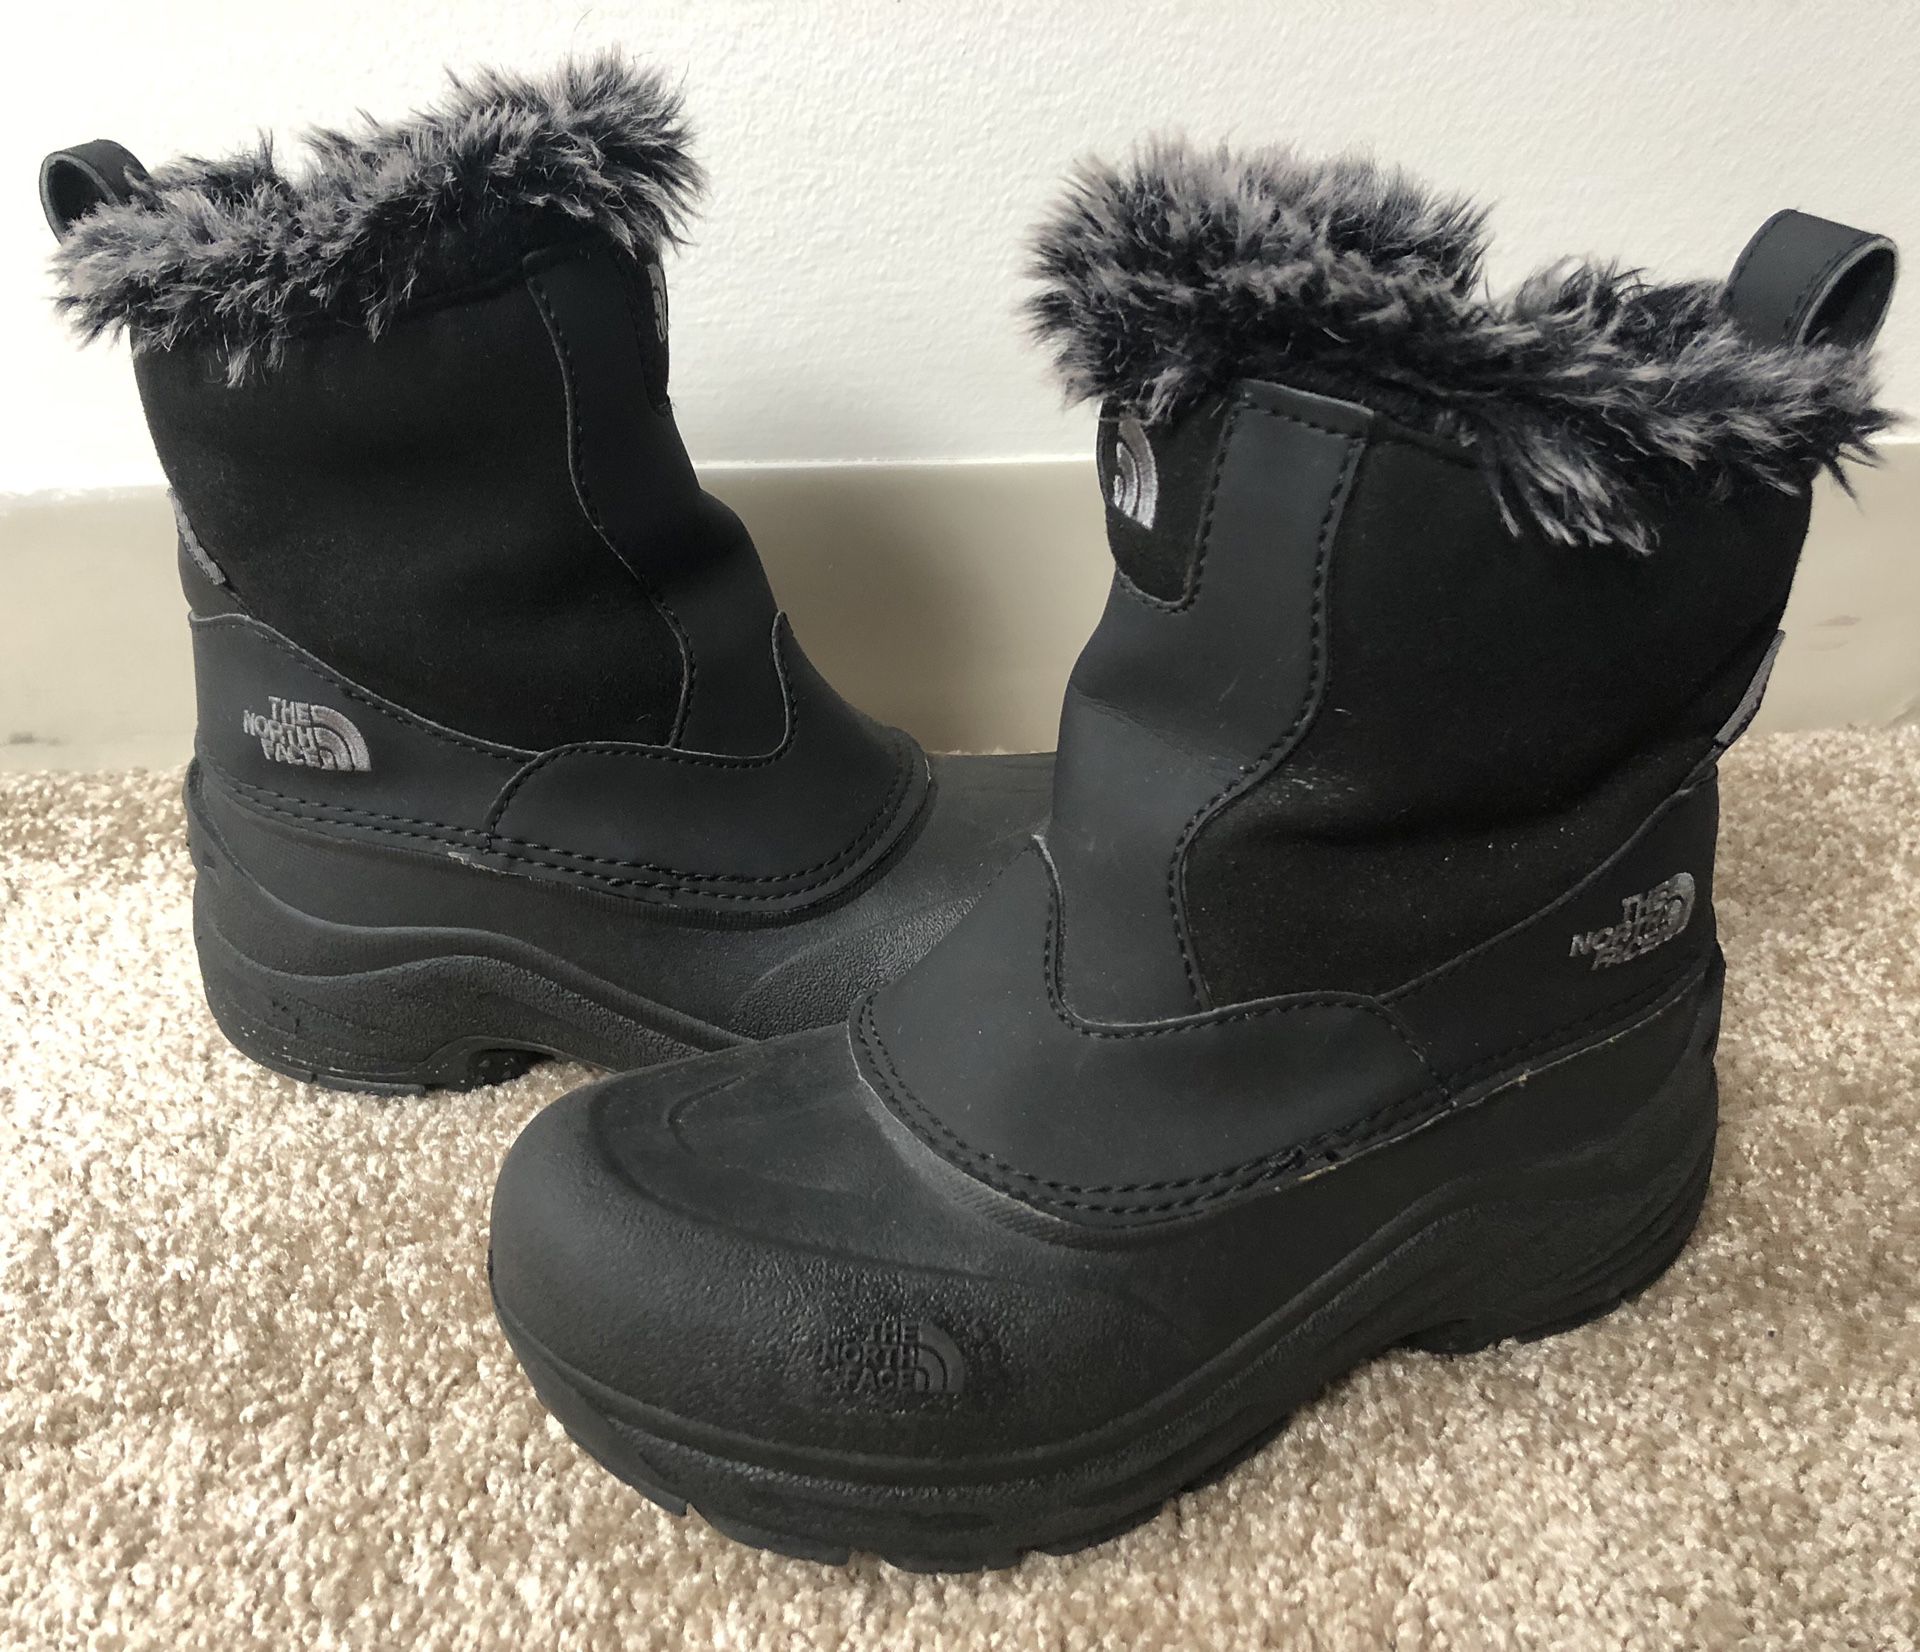 Girls black North Face winter boots, size 4